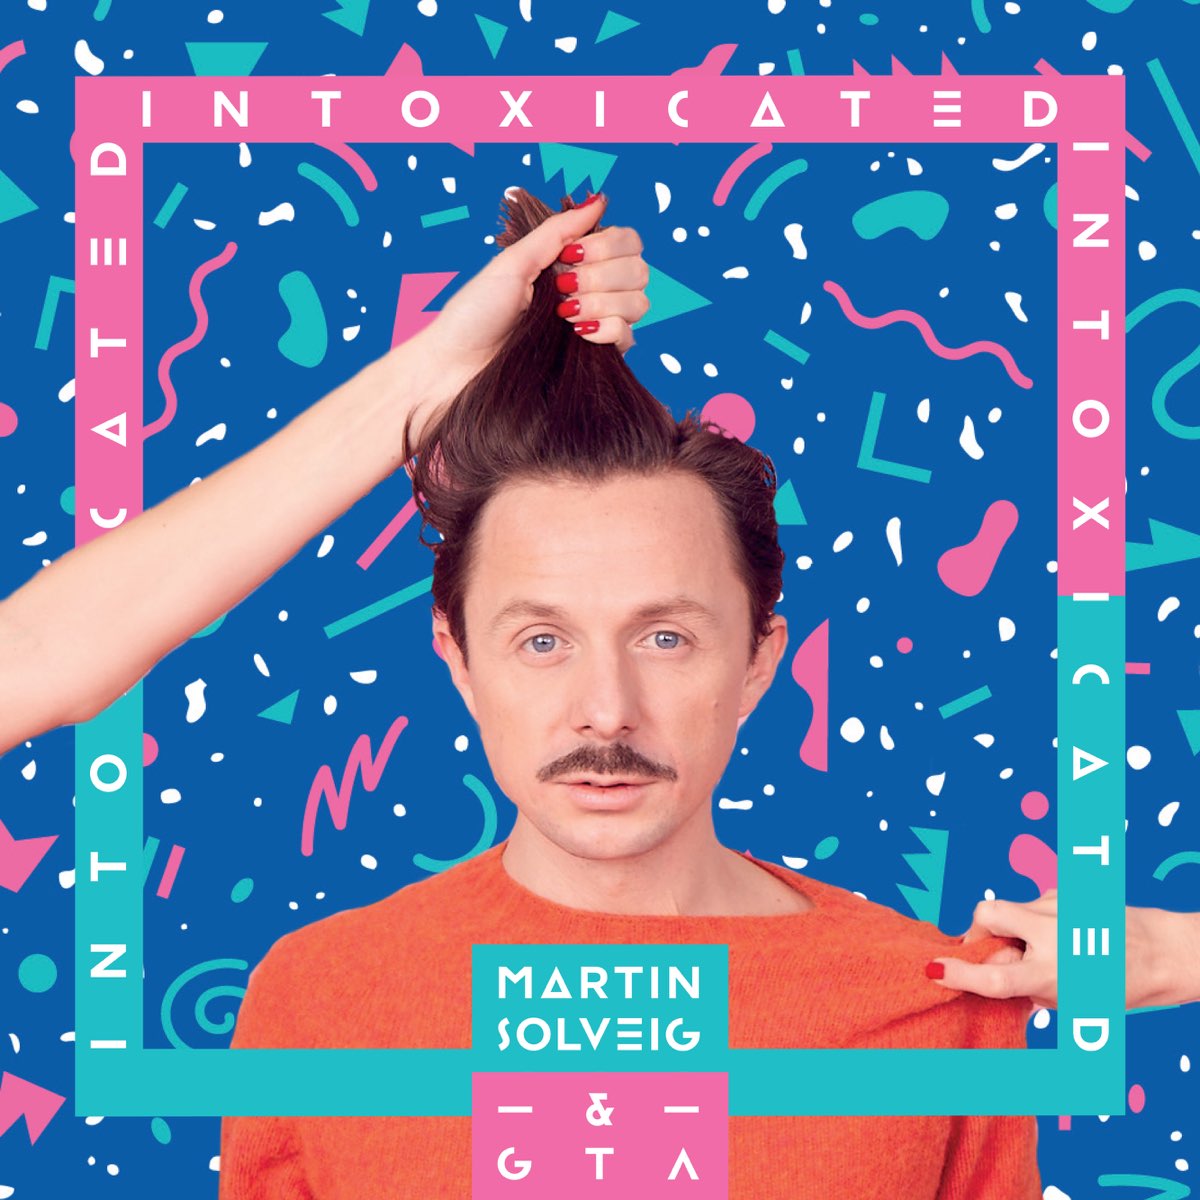 Martin Solveig & Good Times Ahead Intoxicated cover artwork